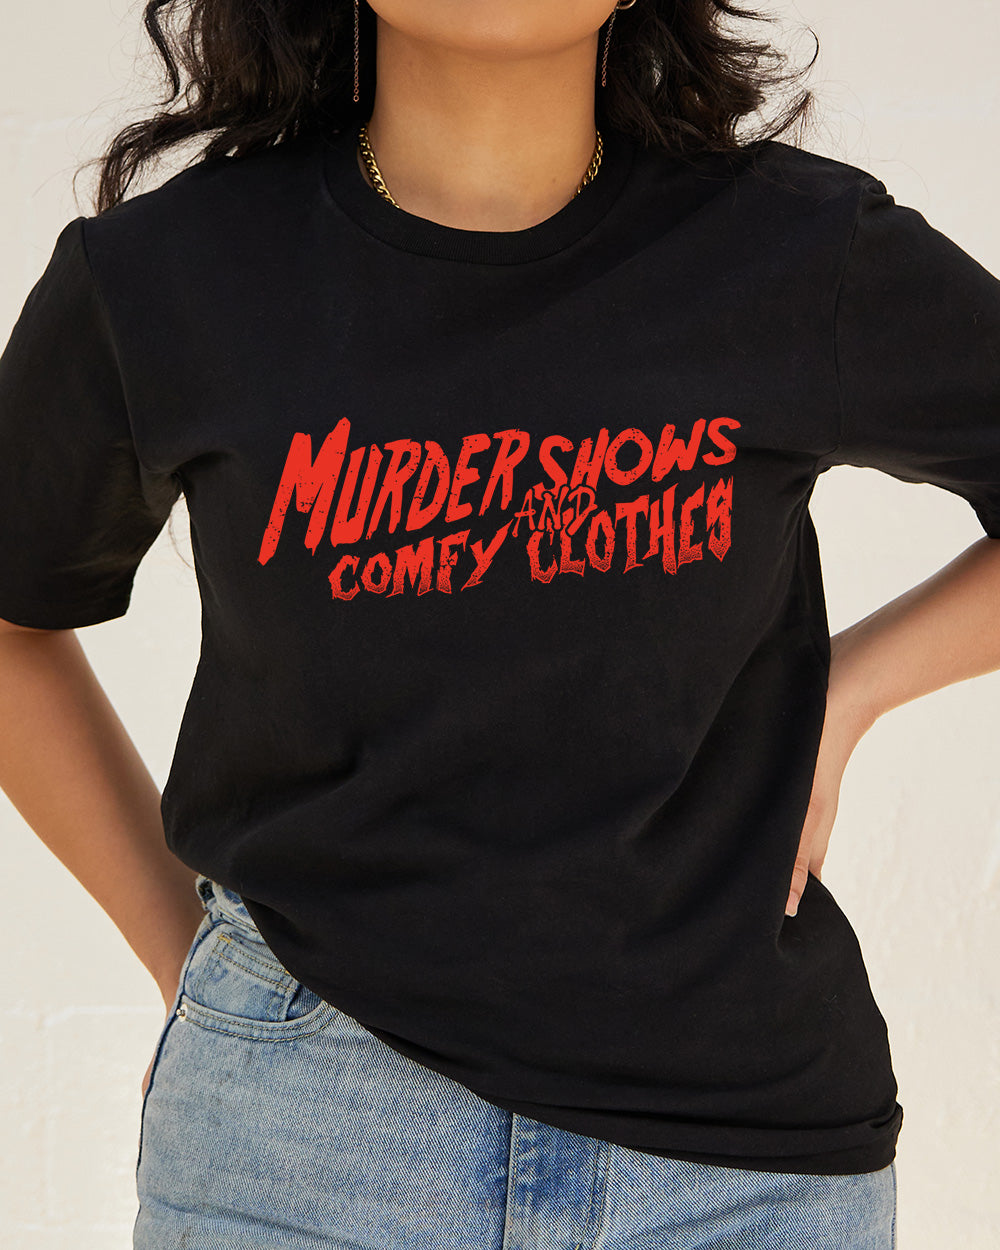 Murder Shows and Comfy Clothes T-Shirt Europe Online Black